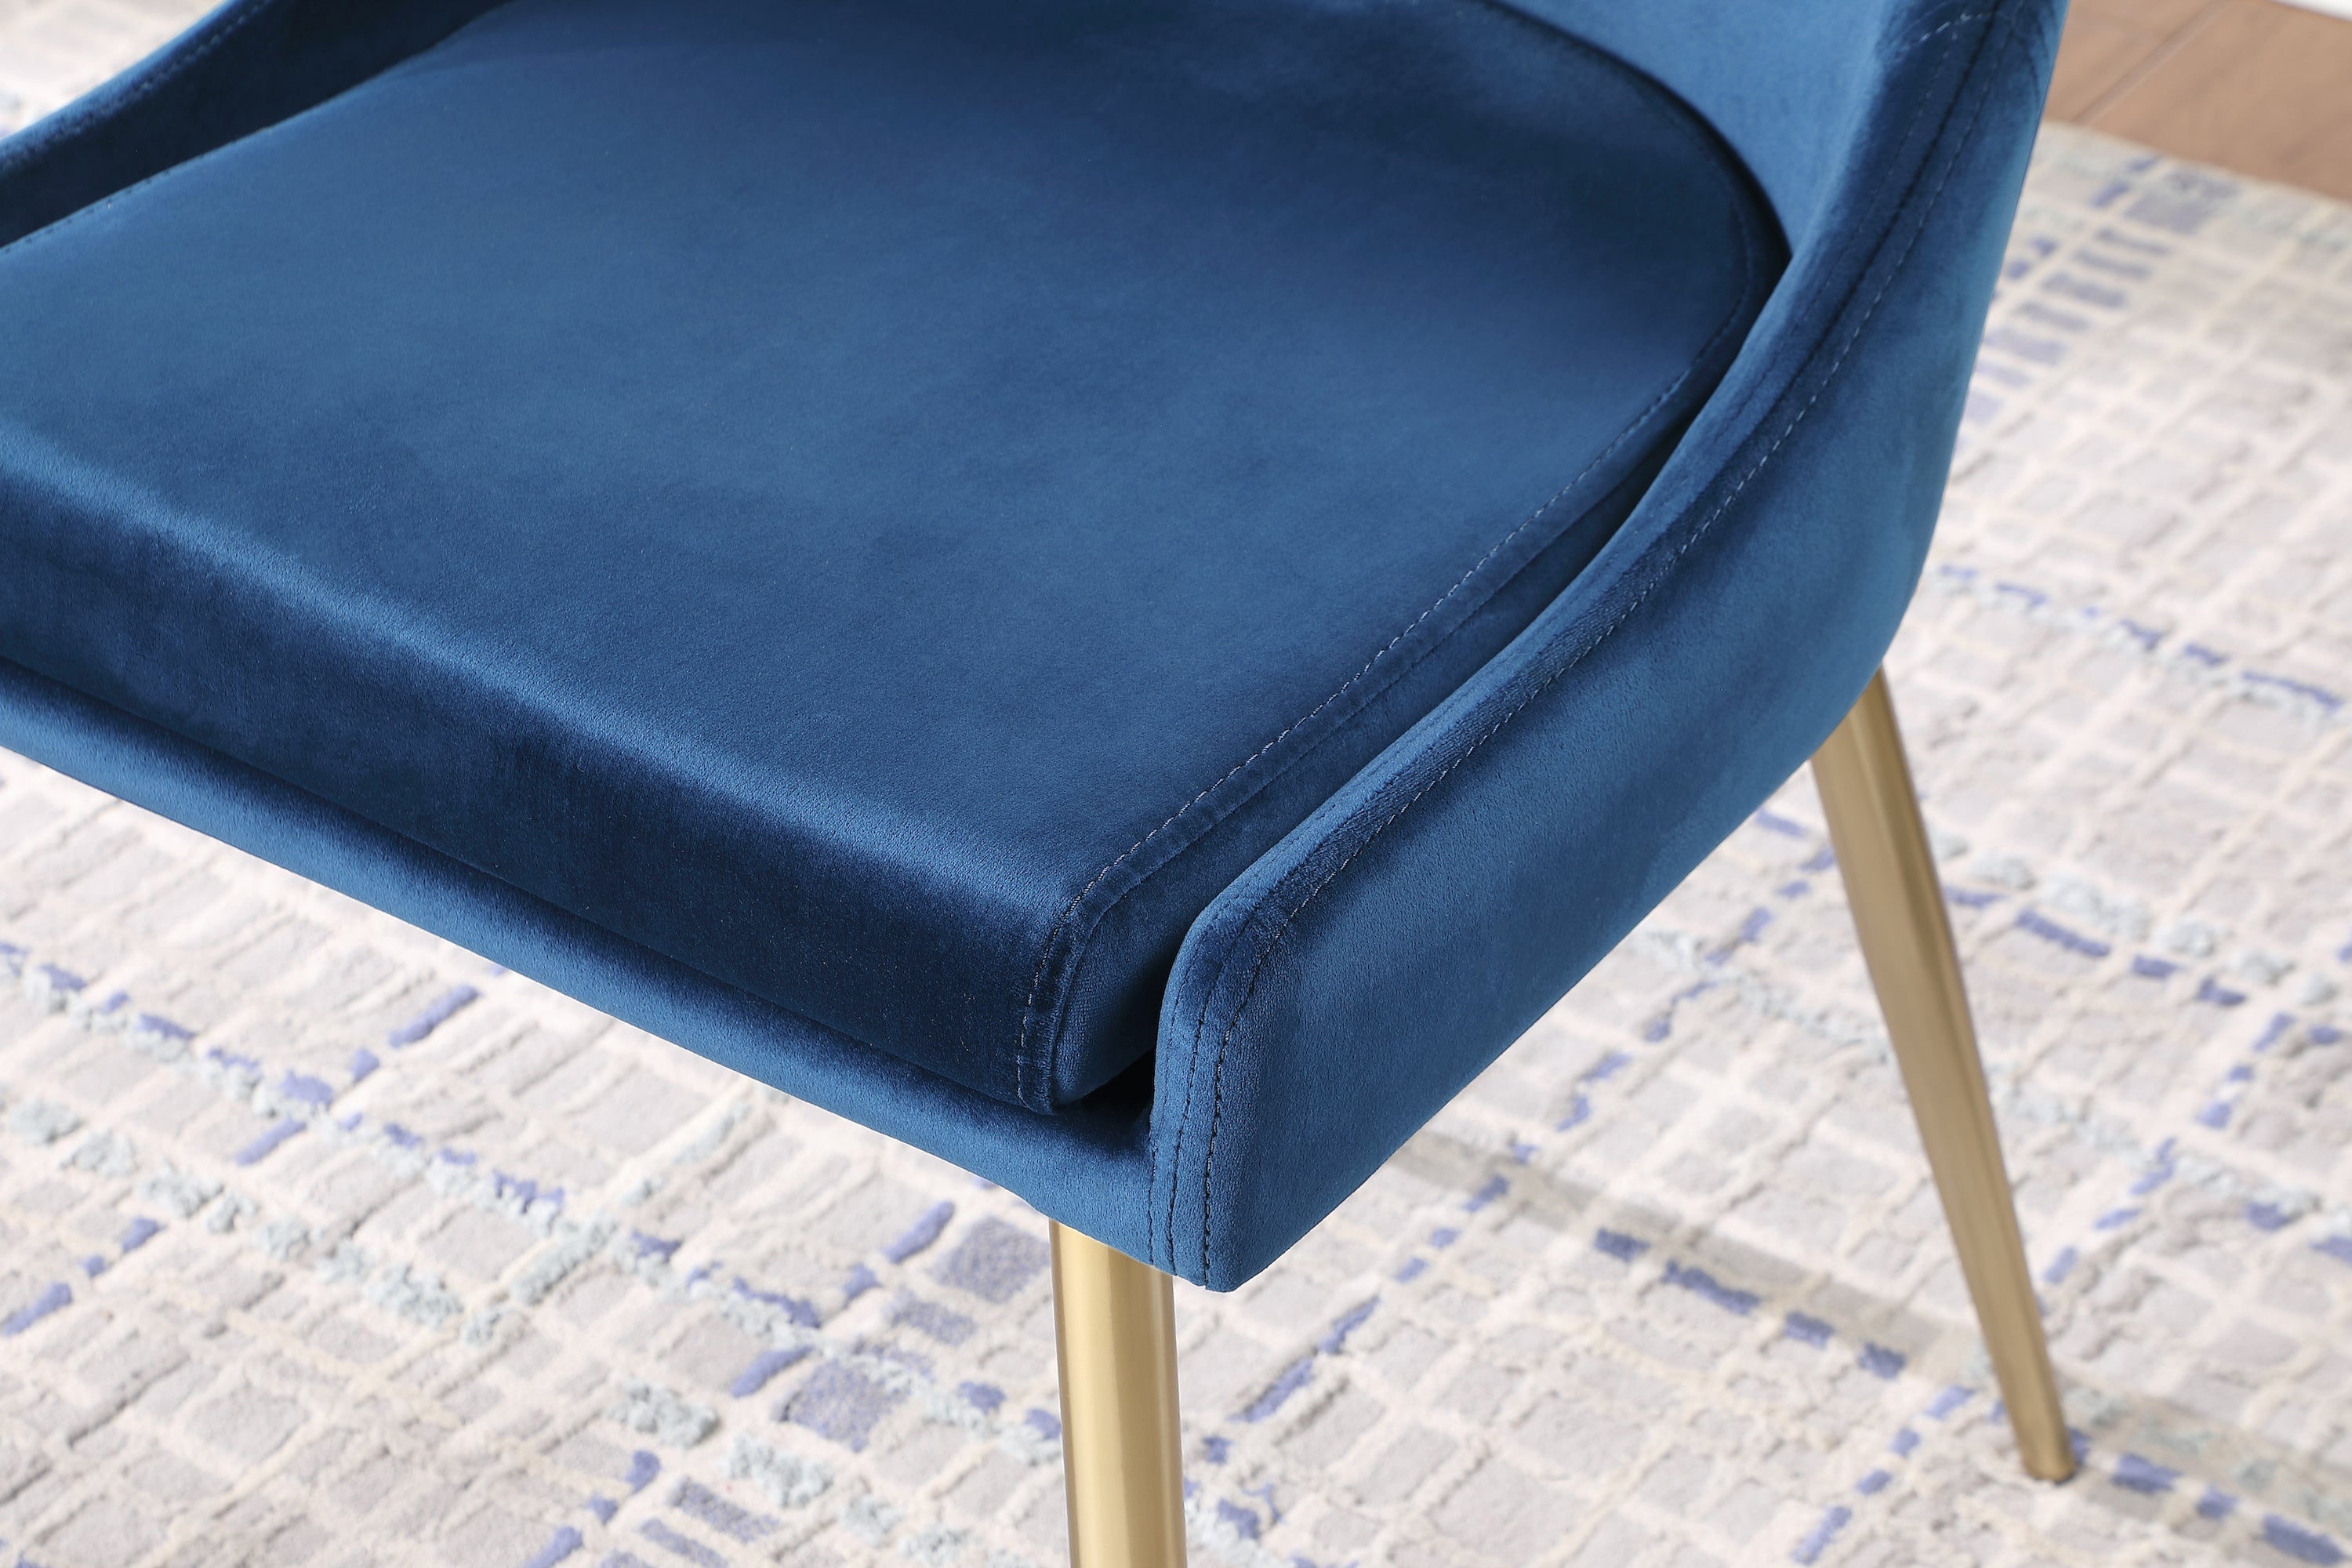 Contemporary Velvet Upholstered Dining Chair with Sturdy Metal Legs (Set of 2) - Blue